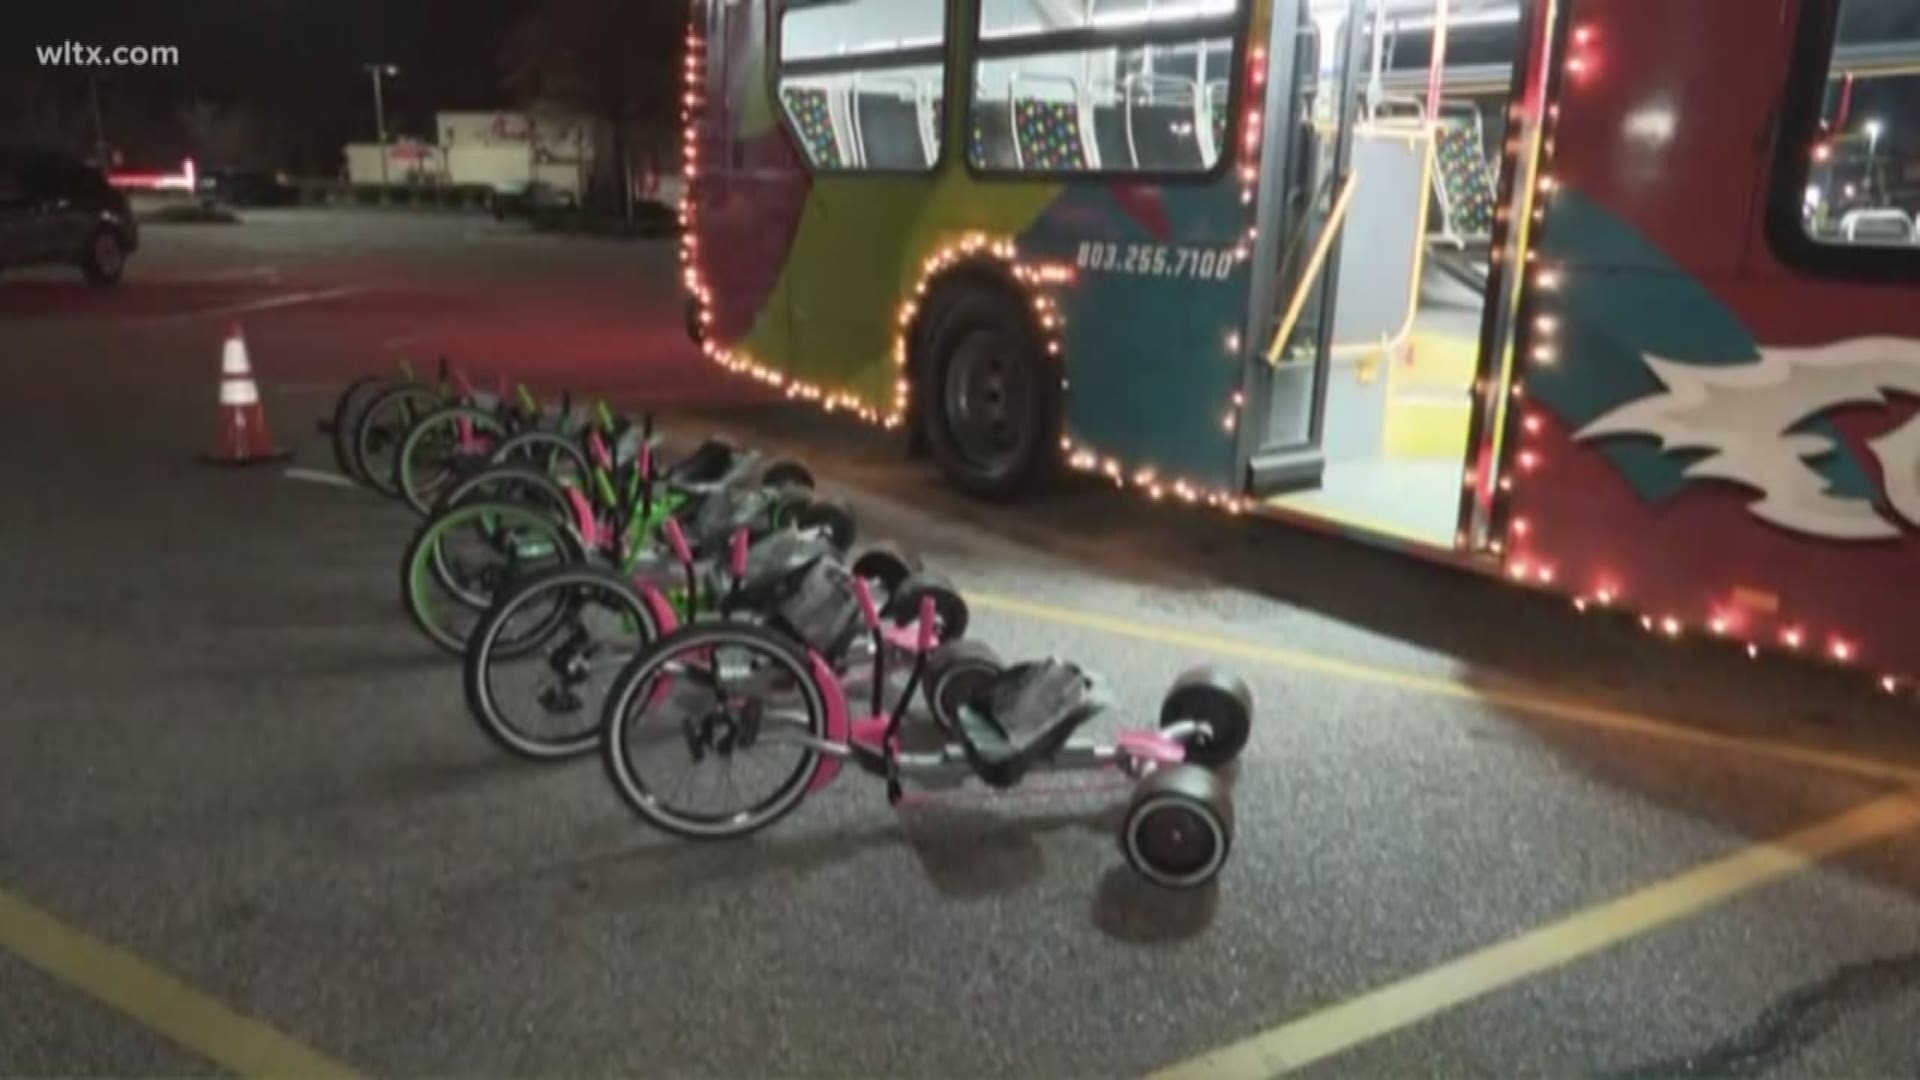 The Northeast Kiwanis Club donated many bicycles to News19's Stuff-a-Bus at the Walmart on Forest Drive.